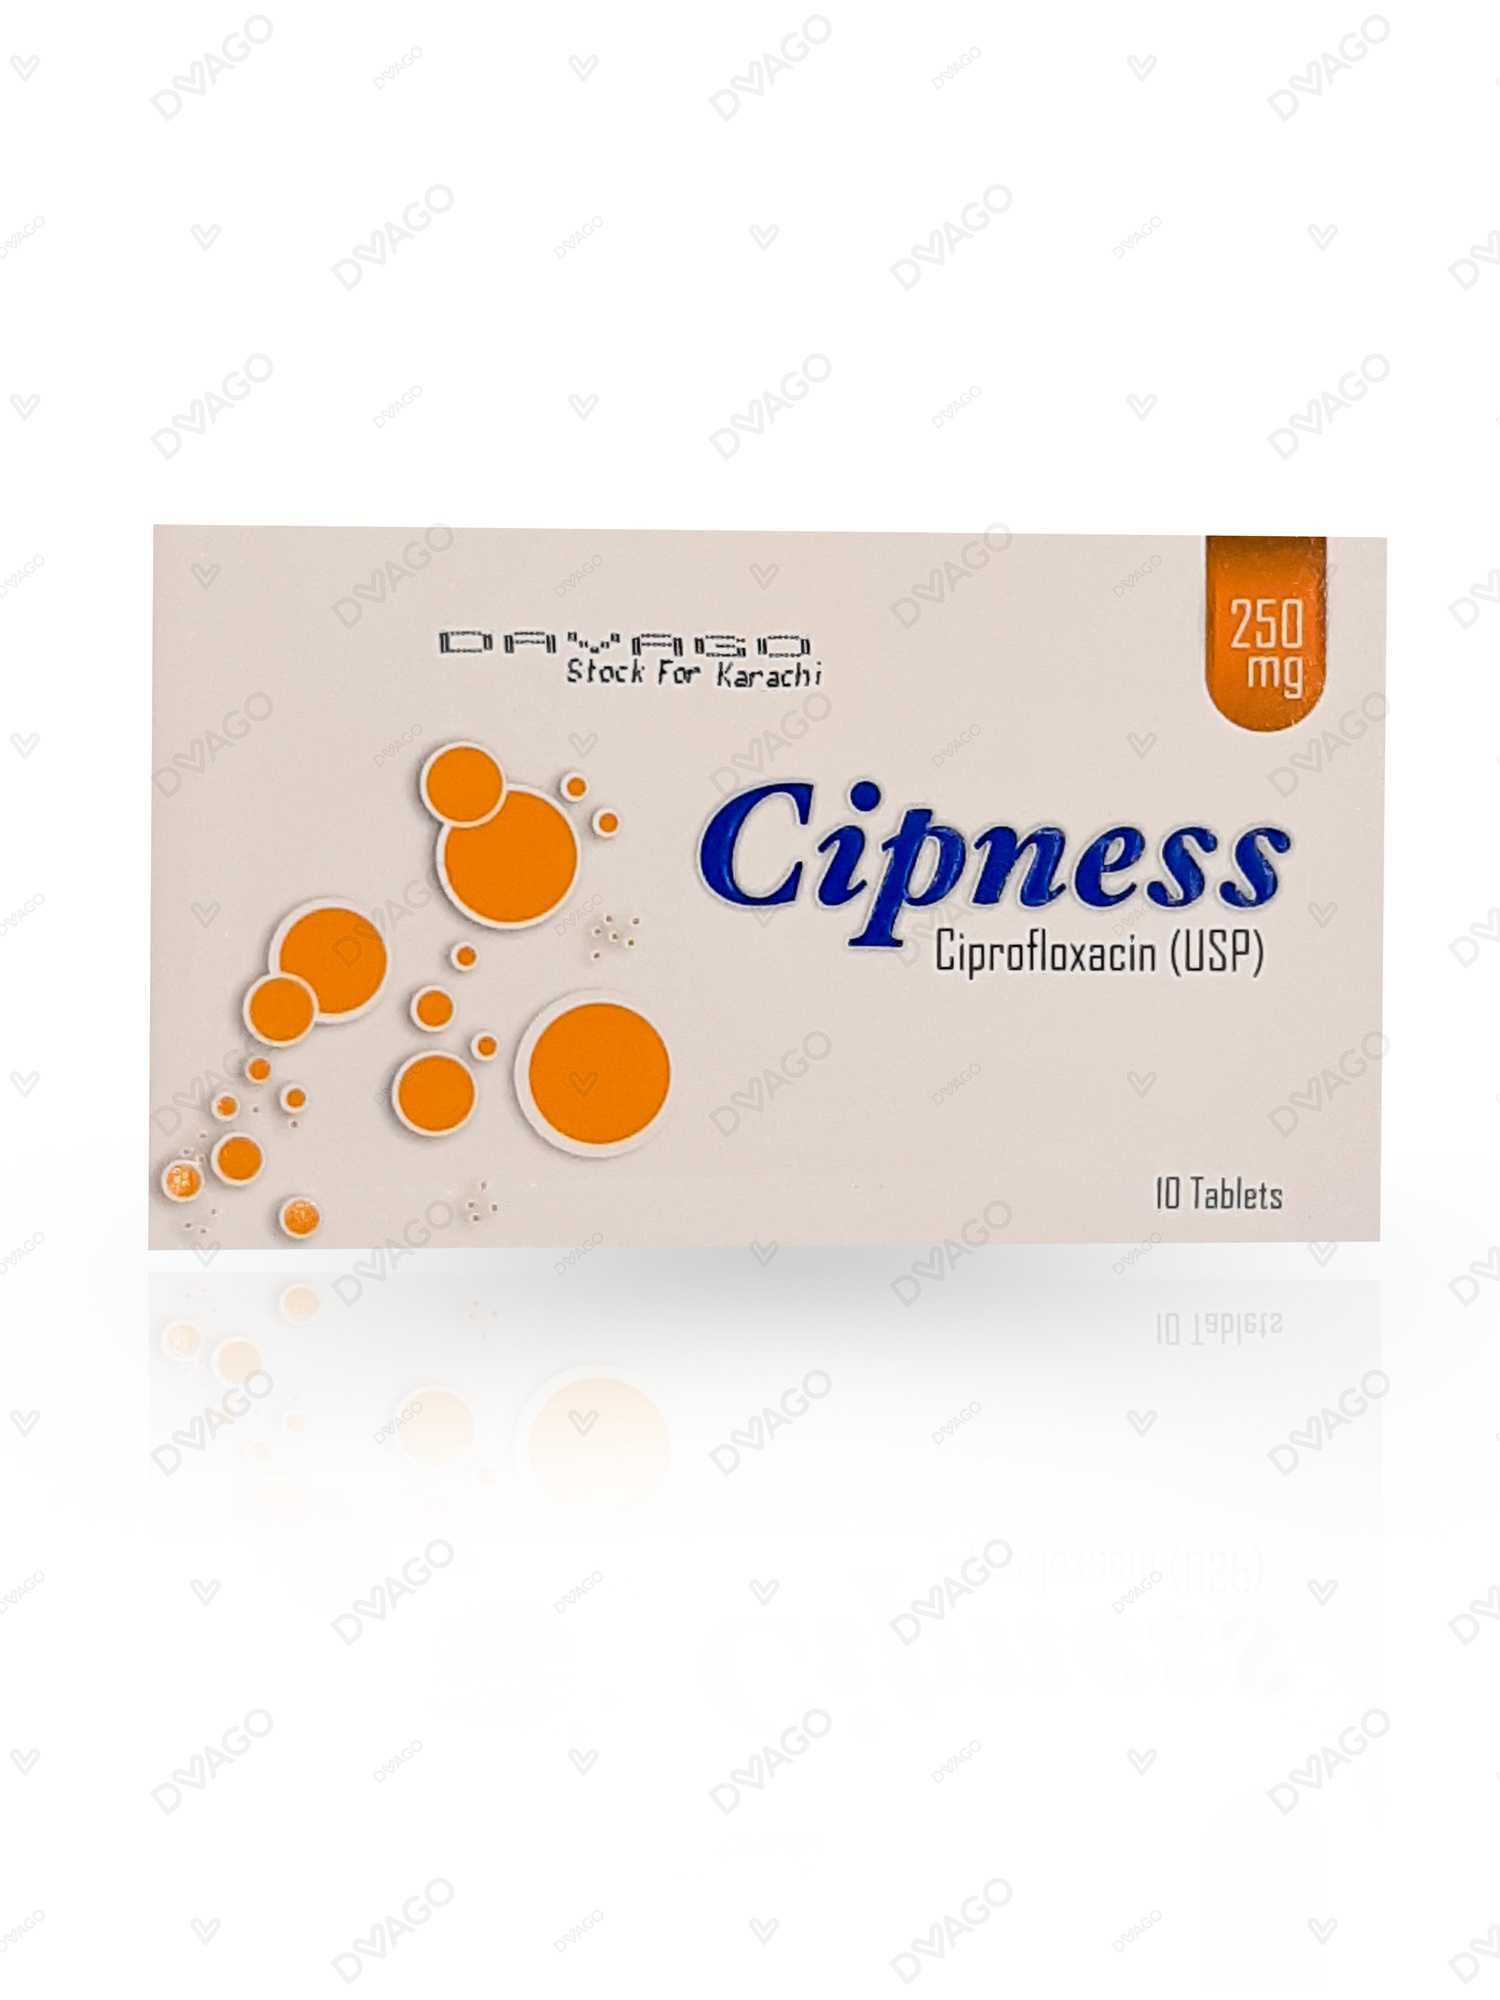 cipnesss tablets 250mg